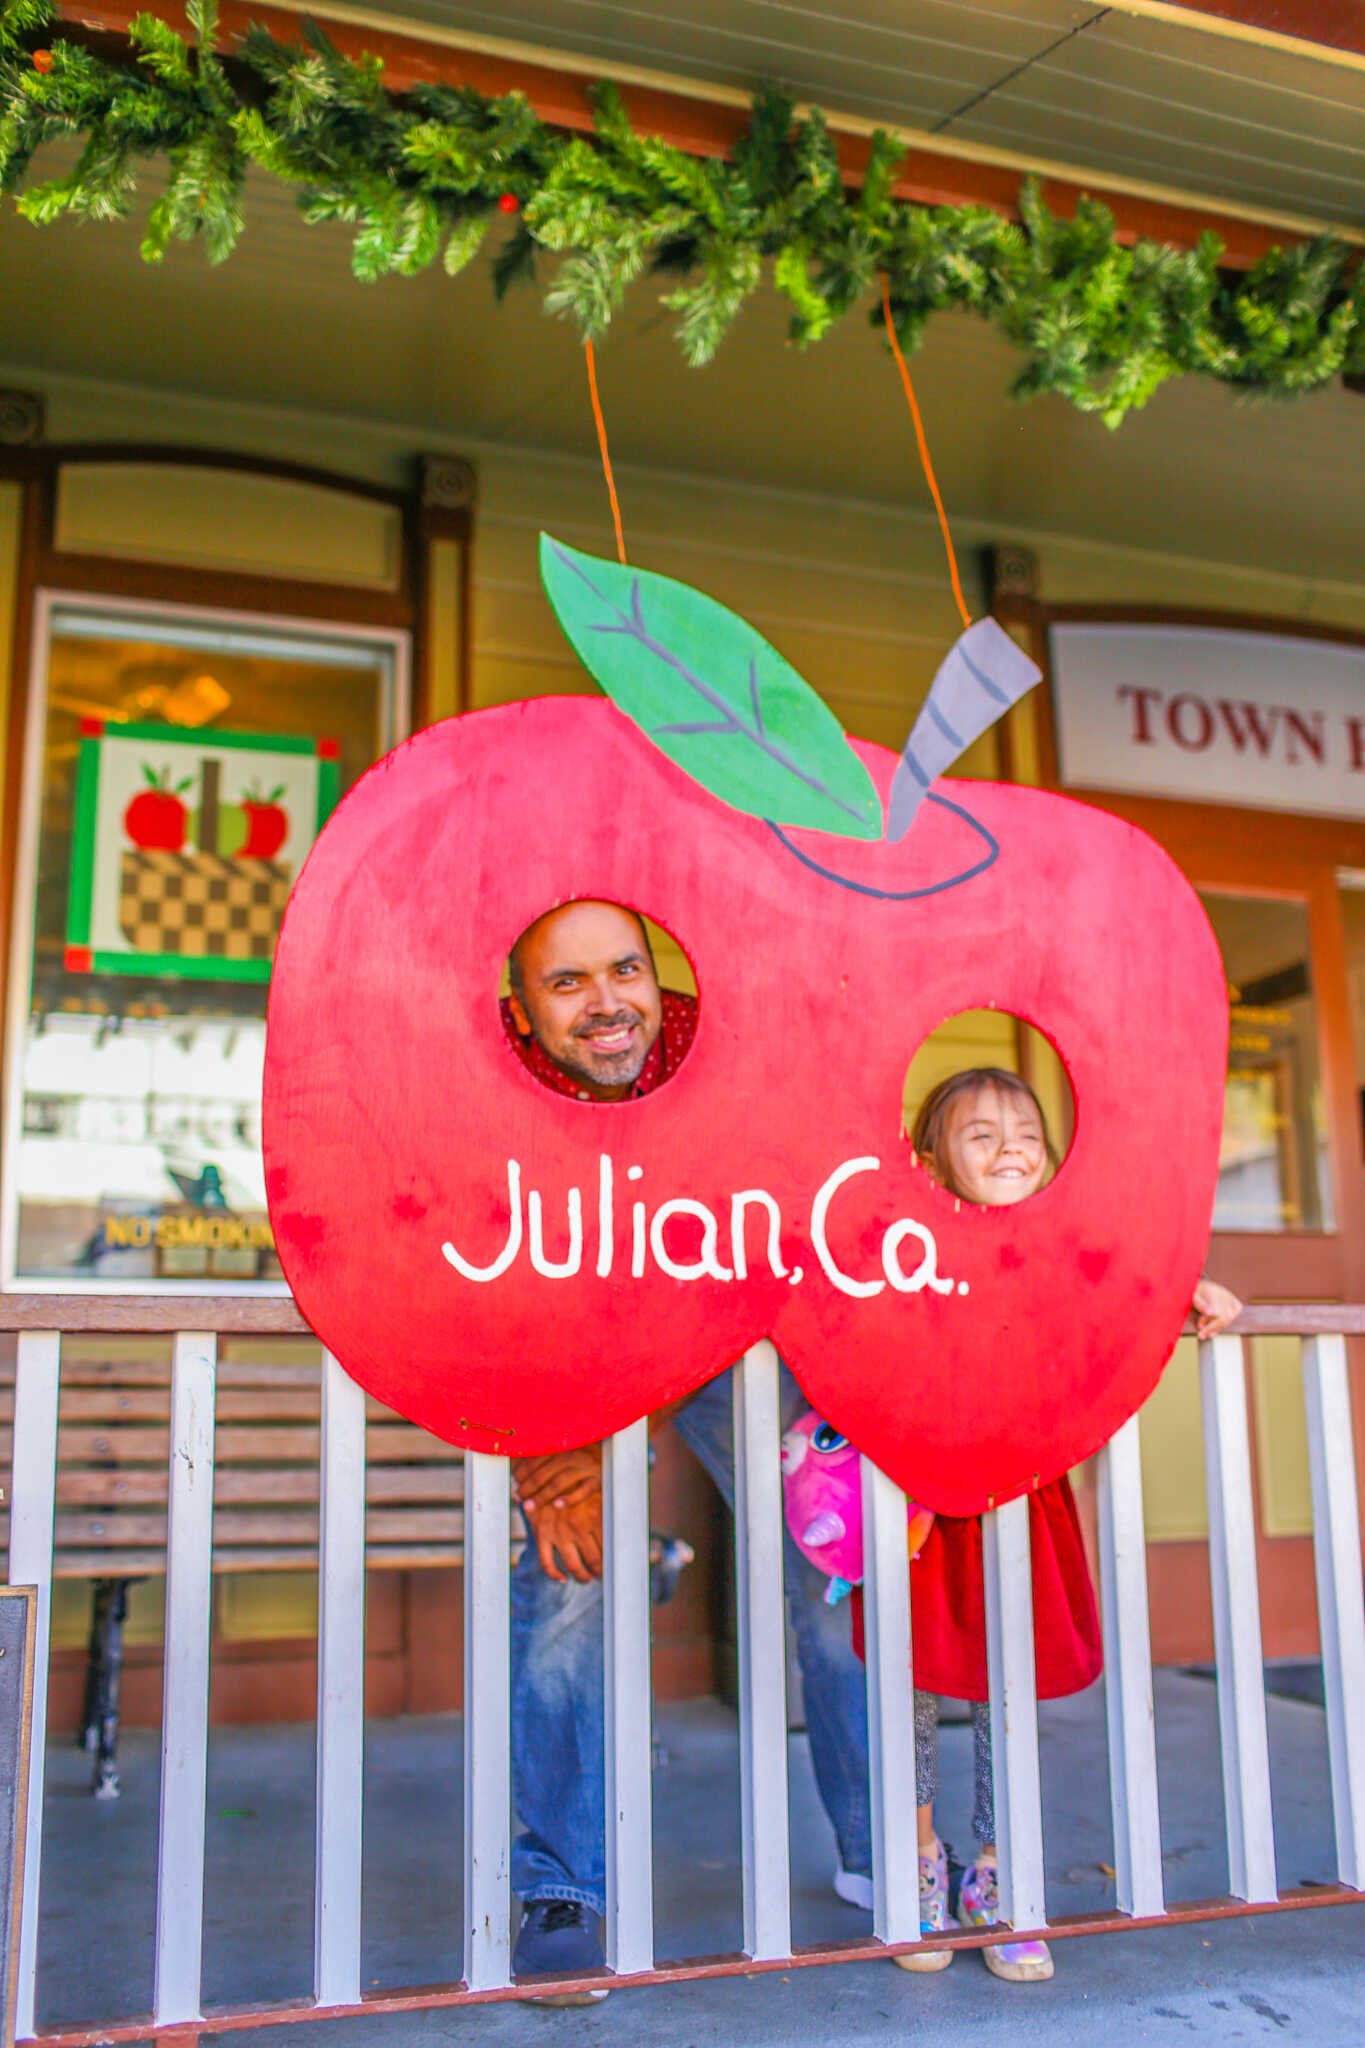 The Complete Travel Guide to Julian, California